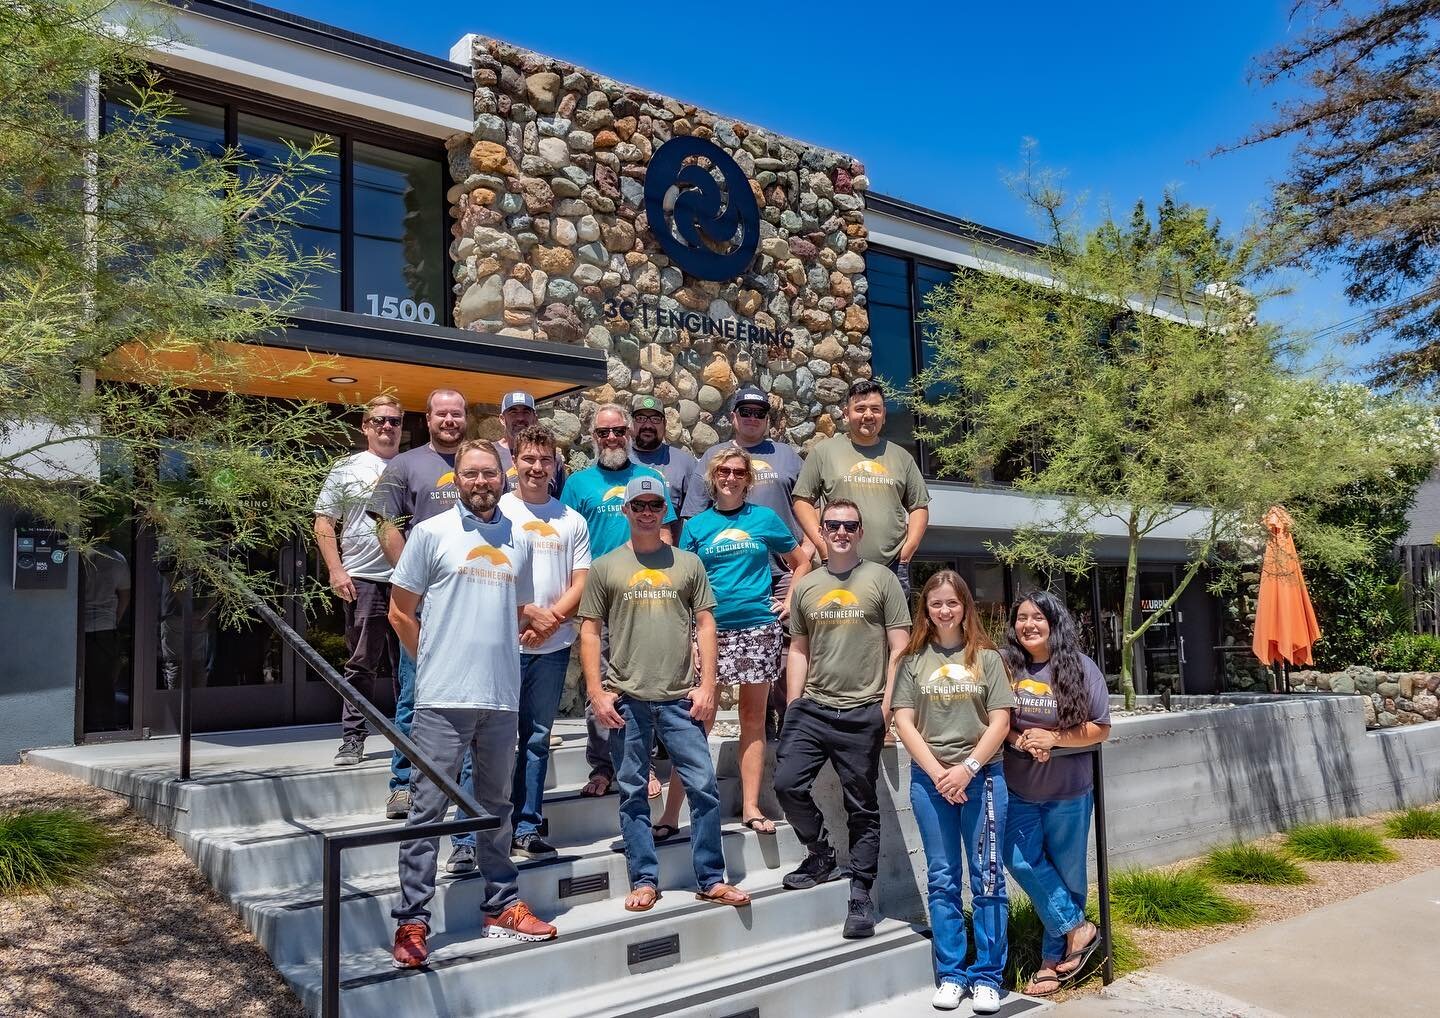 This past Friday 3CE celebrated 13 years of business! 

Thank you to our clients, team, and community members for the past 13 years of making buildings run better. 

Feel free to stop by 3CE office for some new stickers! 

#sanluisobispo #companyanni